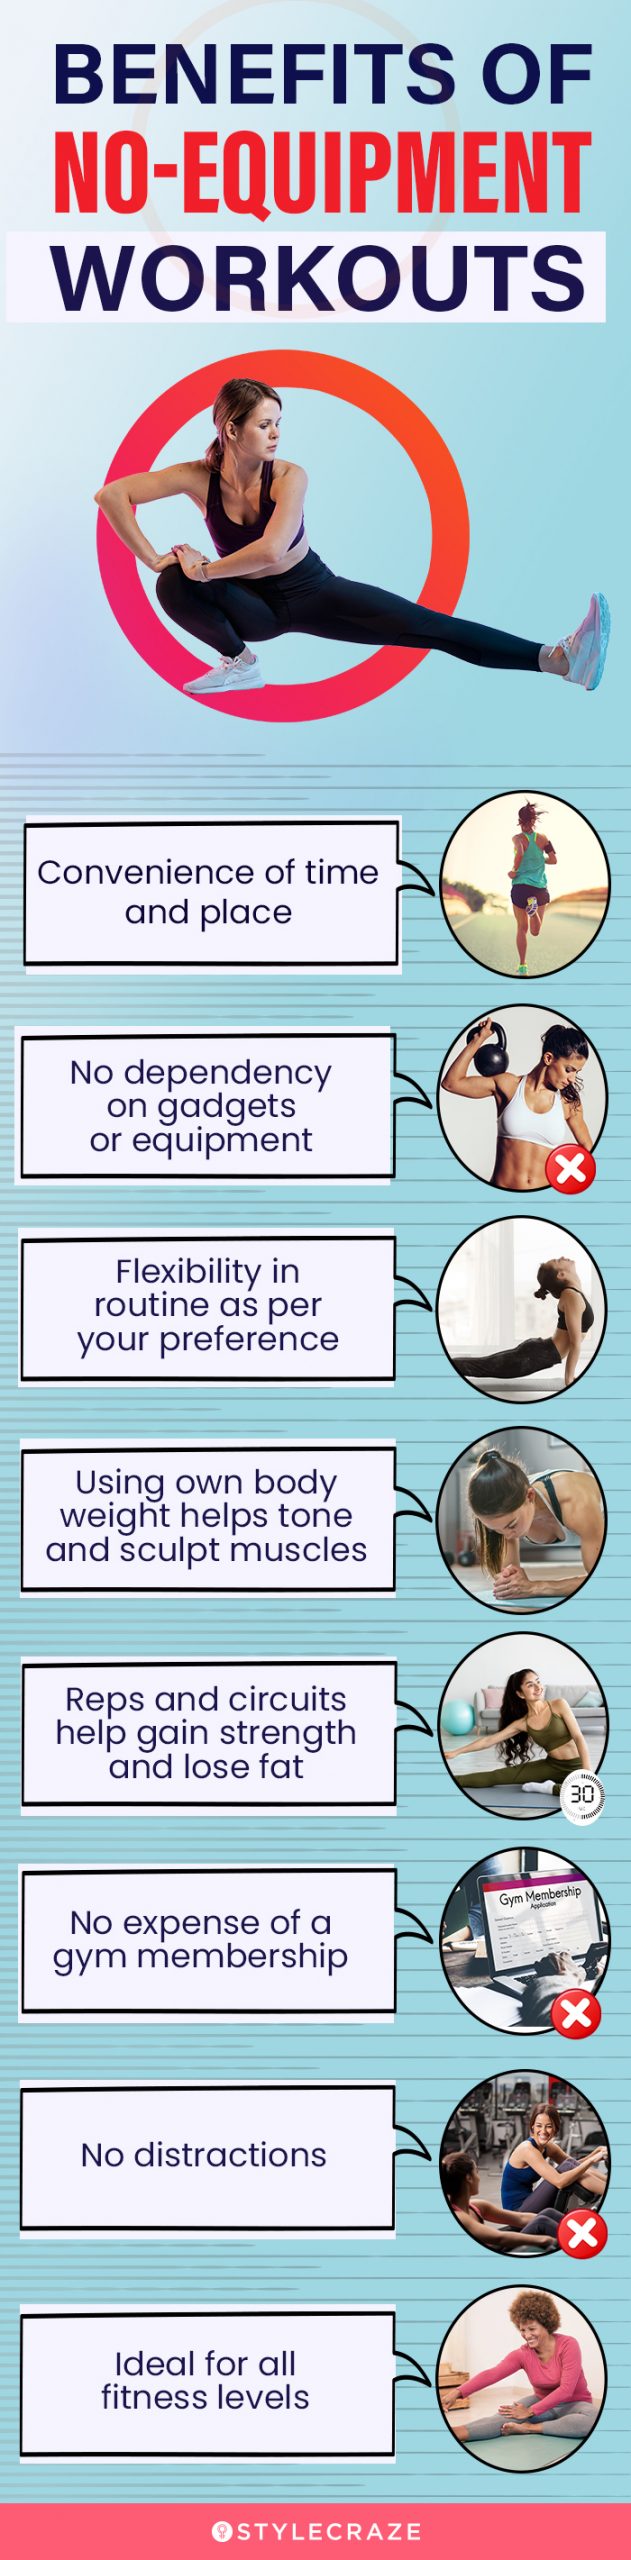 benifits of no equipment workout (infographic)